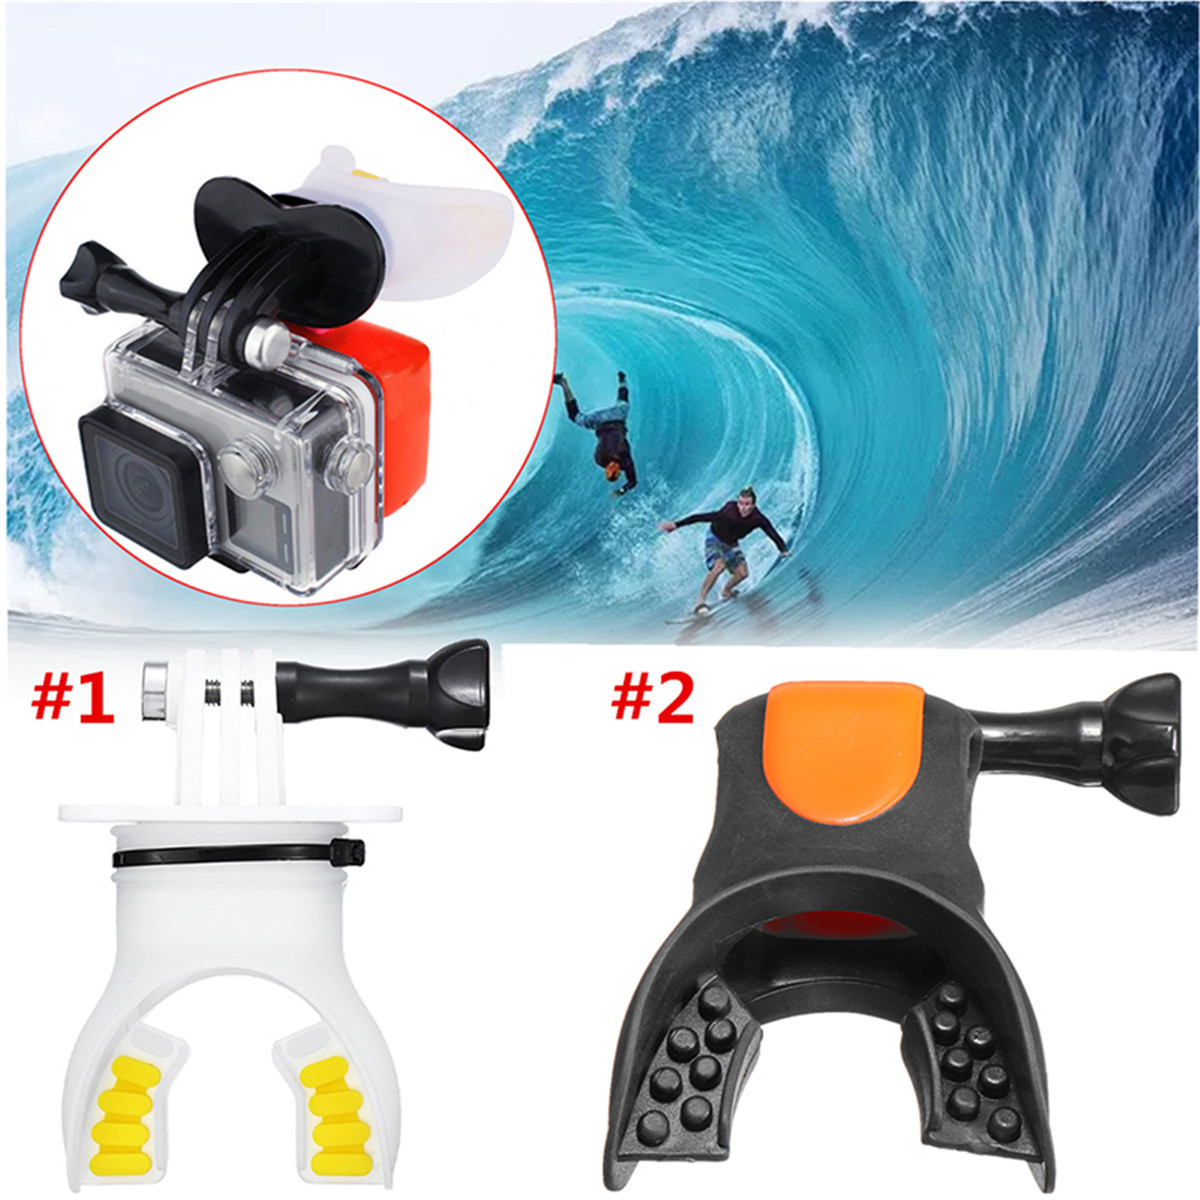 Mouth-Mount-Tooth-Holder-Surfing-Braces-Floaty-For-GoPro-Hero-HD-43321-Camera-1640675-1